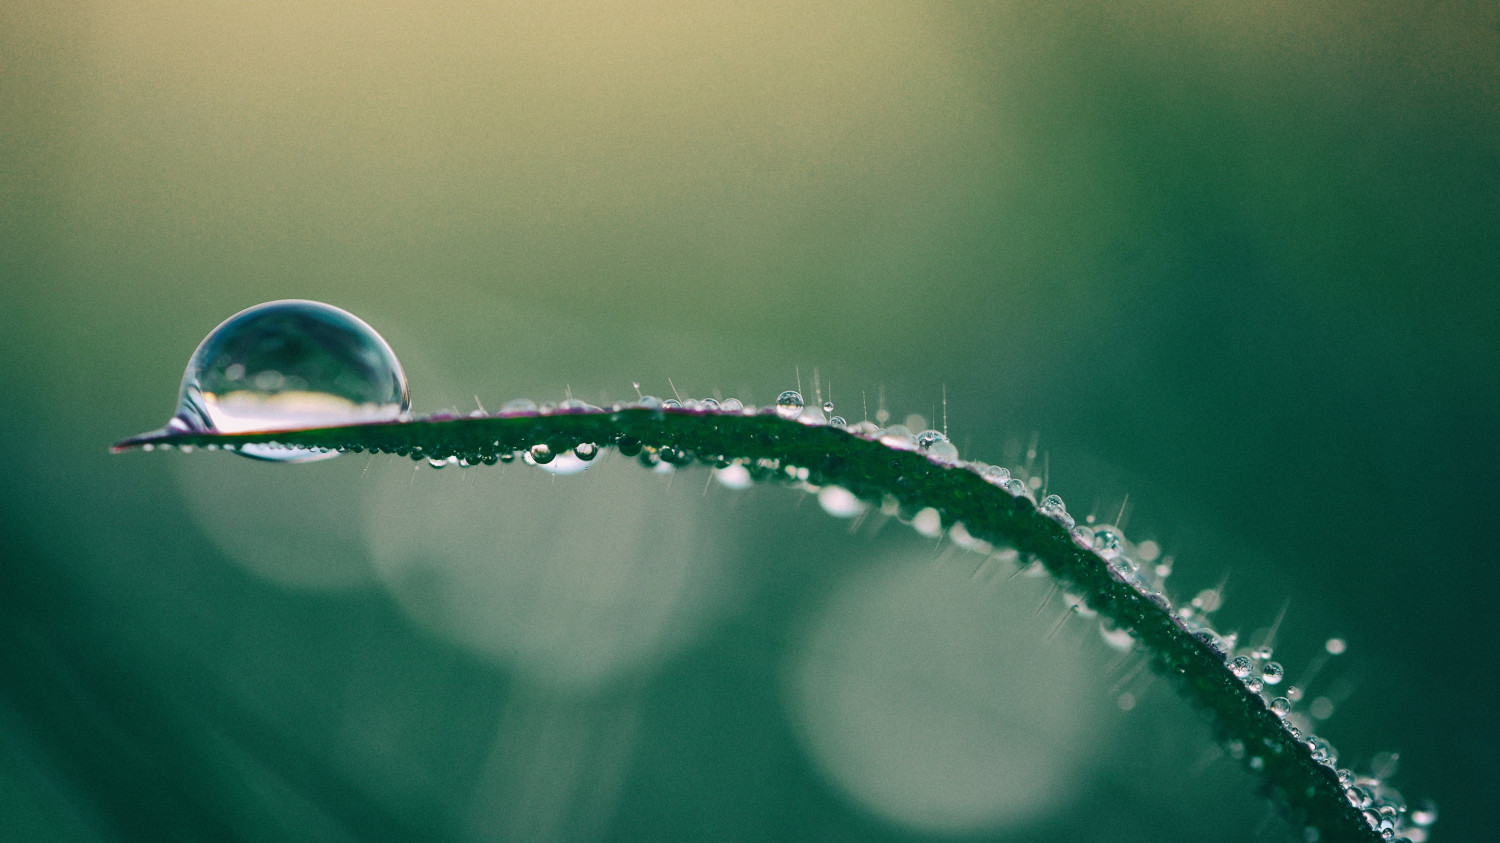 Image of a droplet of water on a blade of grass, background blurred.